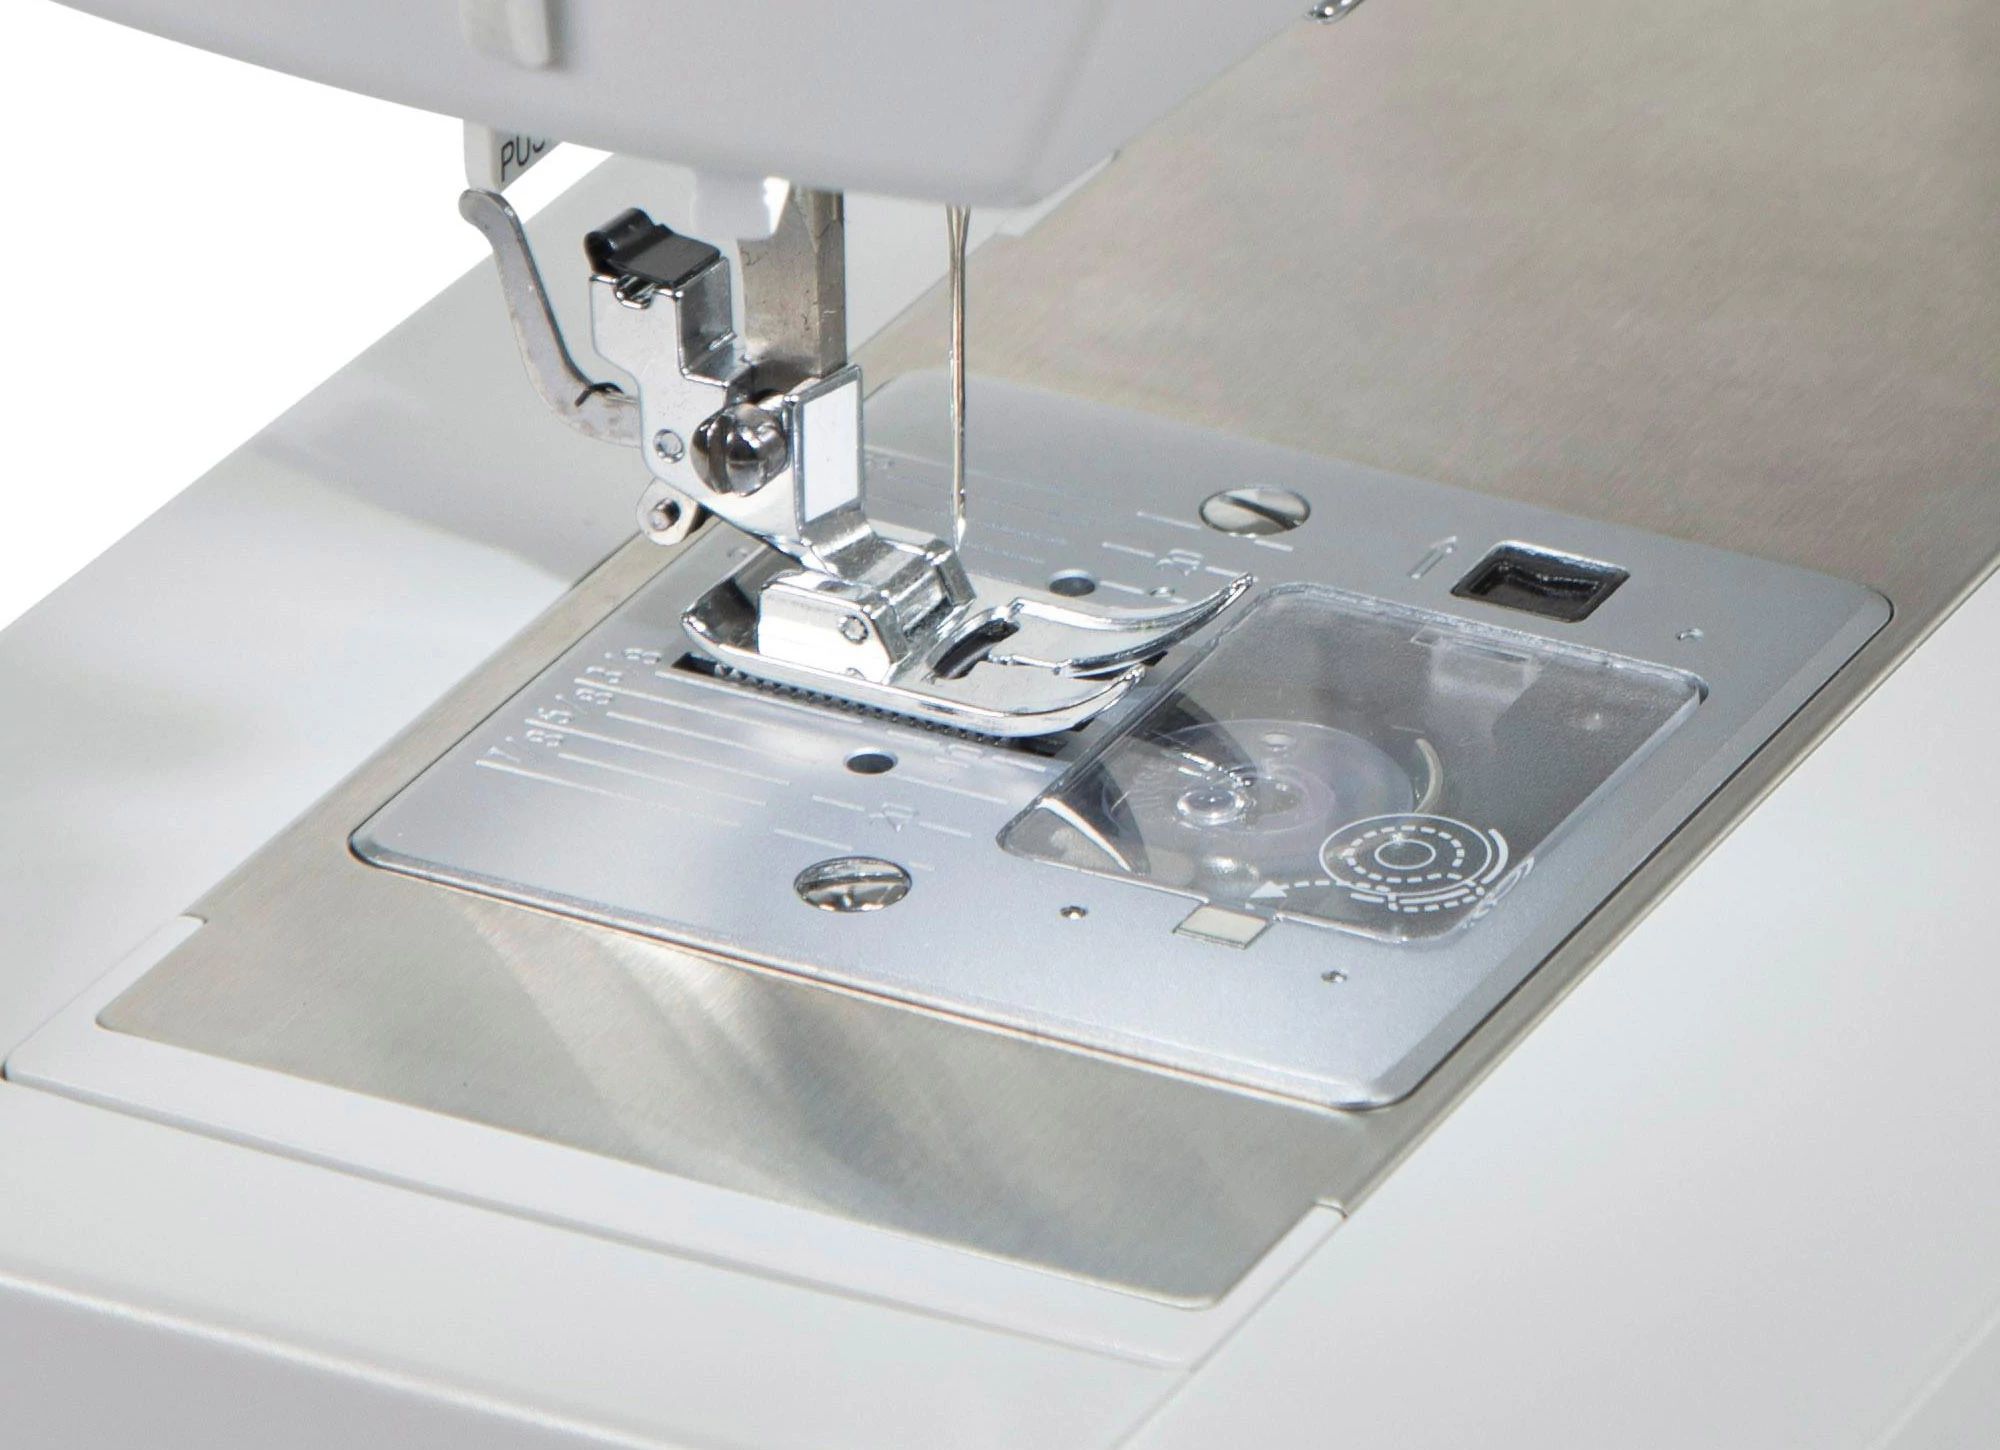 Singer Classic Heavy Duty Mechanical 44s Sewing Machine review by